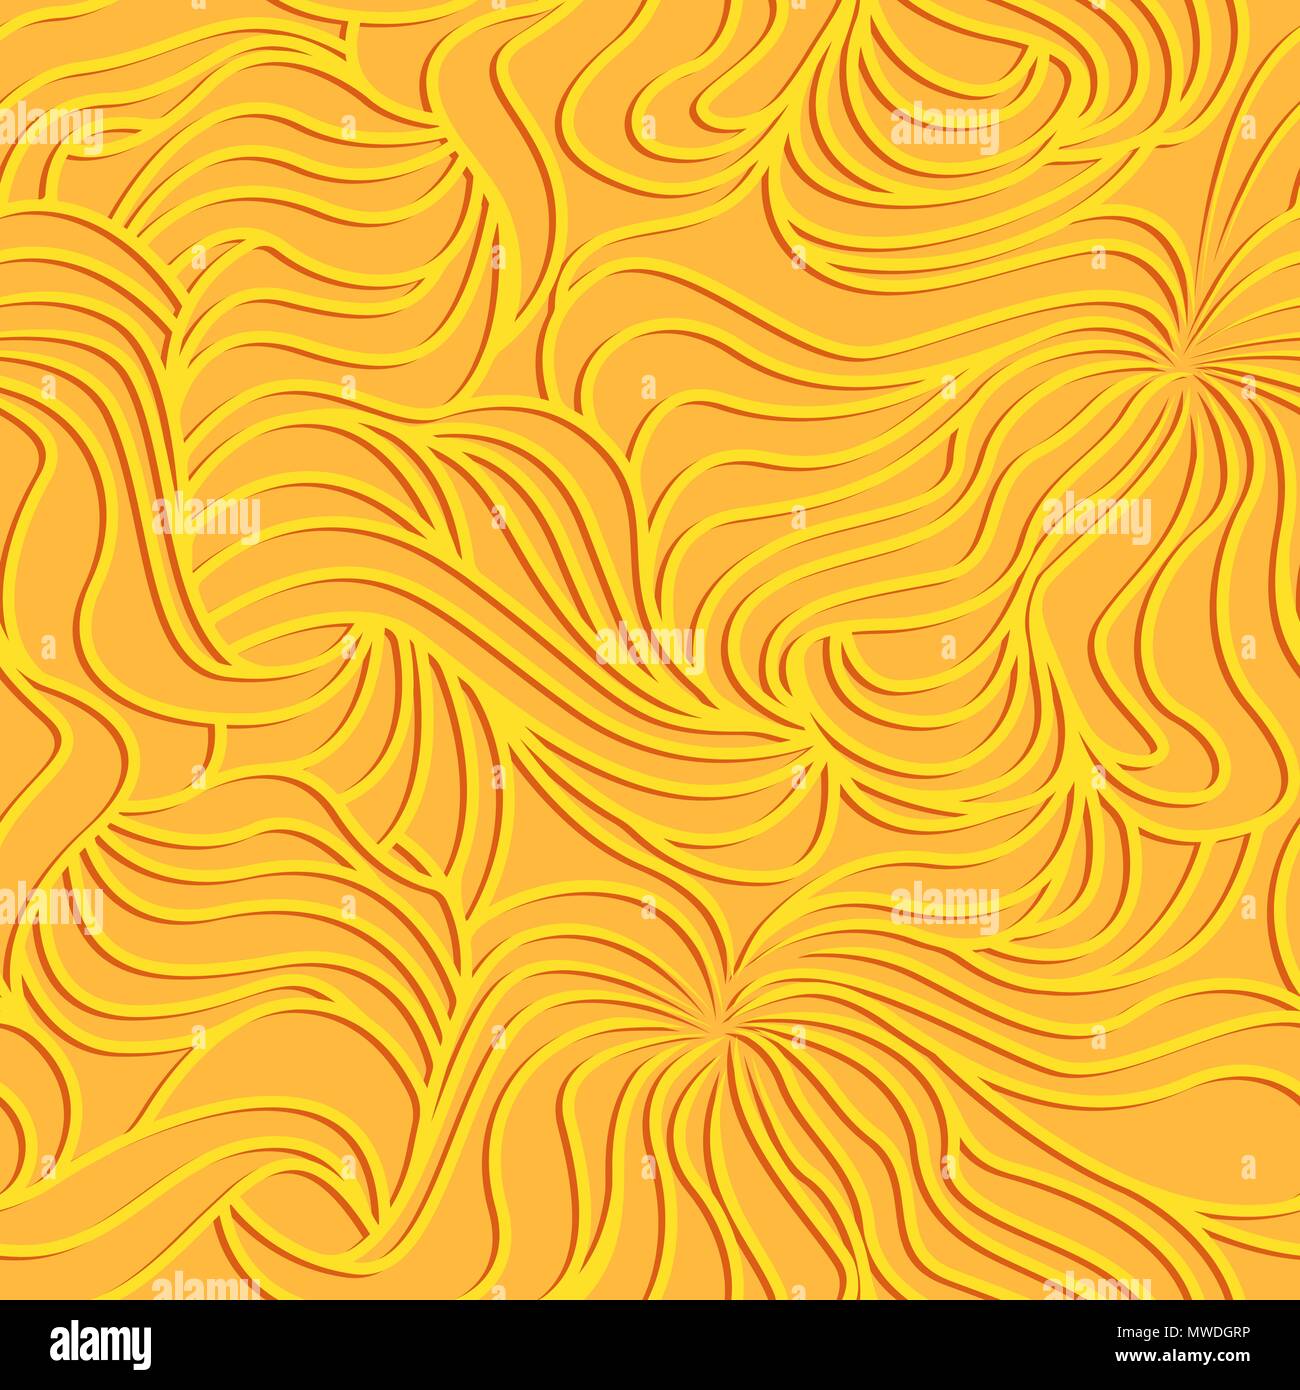 Seamless background made with interwoven wavy lines and curves in yellow and orange colors as a fabric texture Stock Vector